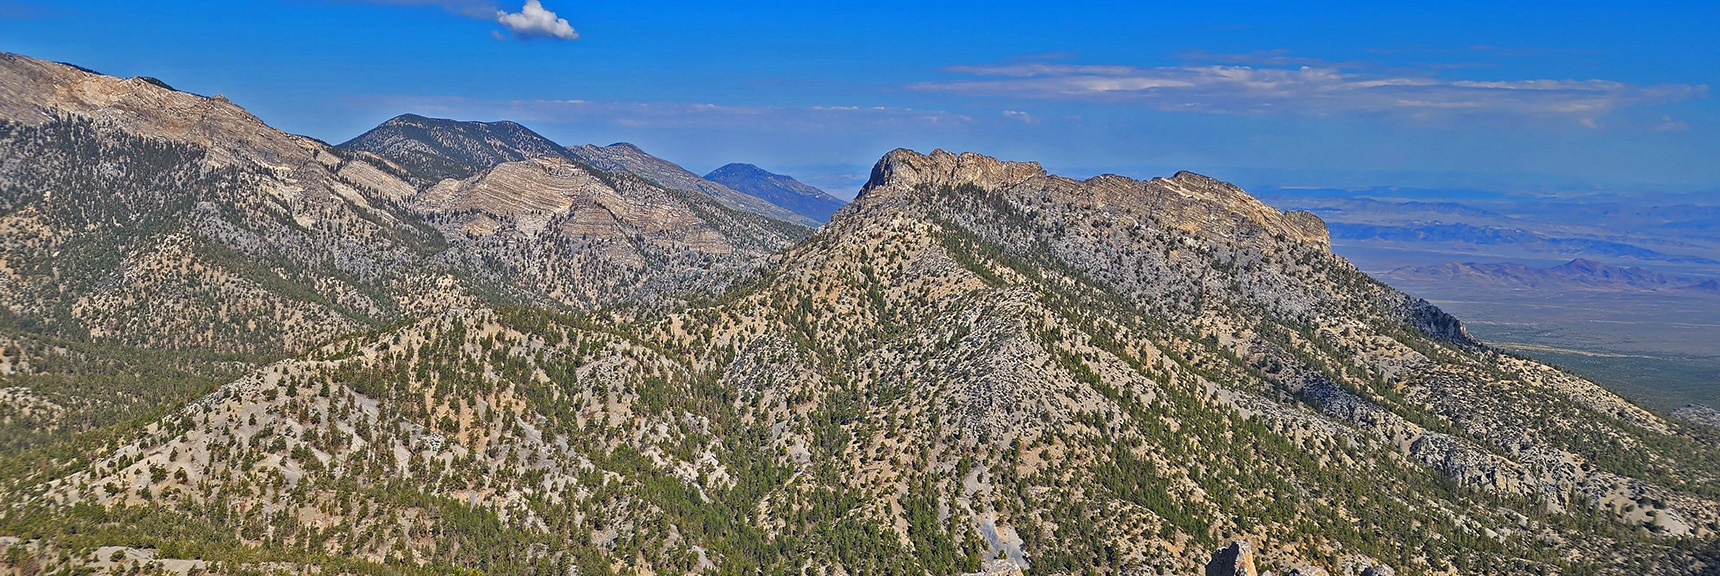 Macks Peak from Sisters North Summit | Sisters North | Lee Canyon | Mt Charleston Wilderness | Spring Mountains, Nevada